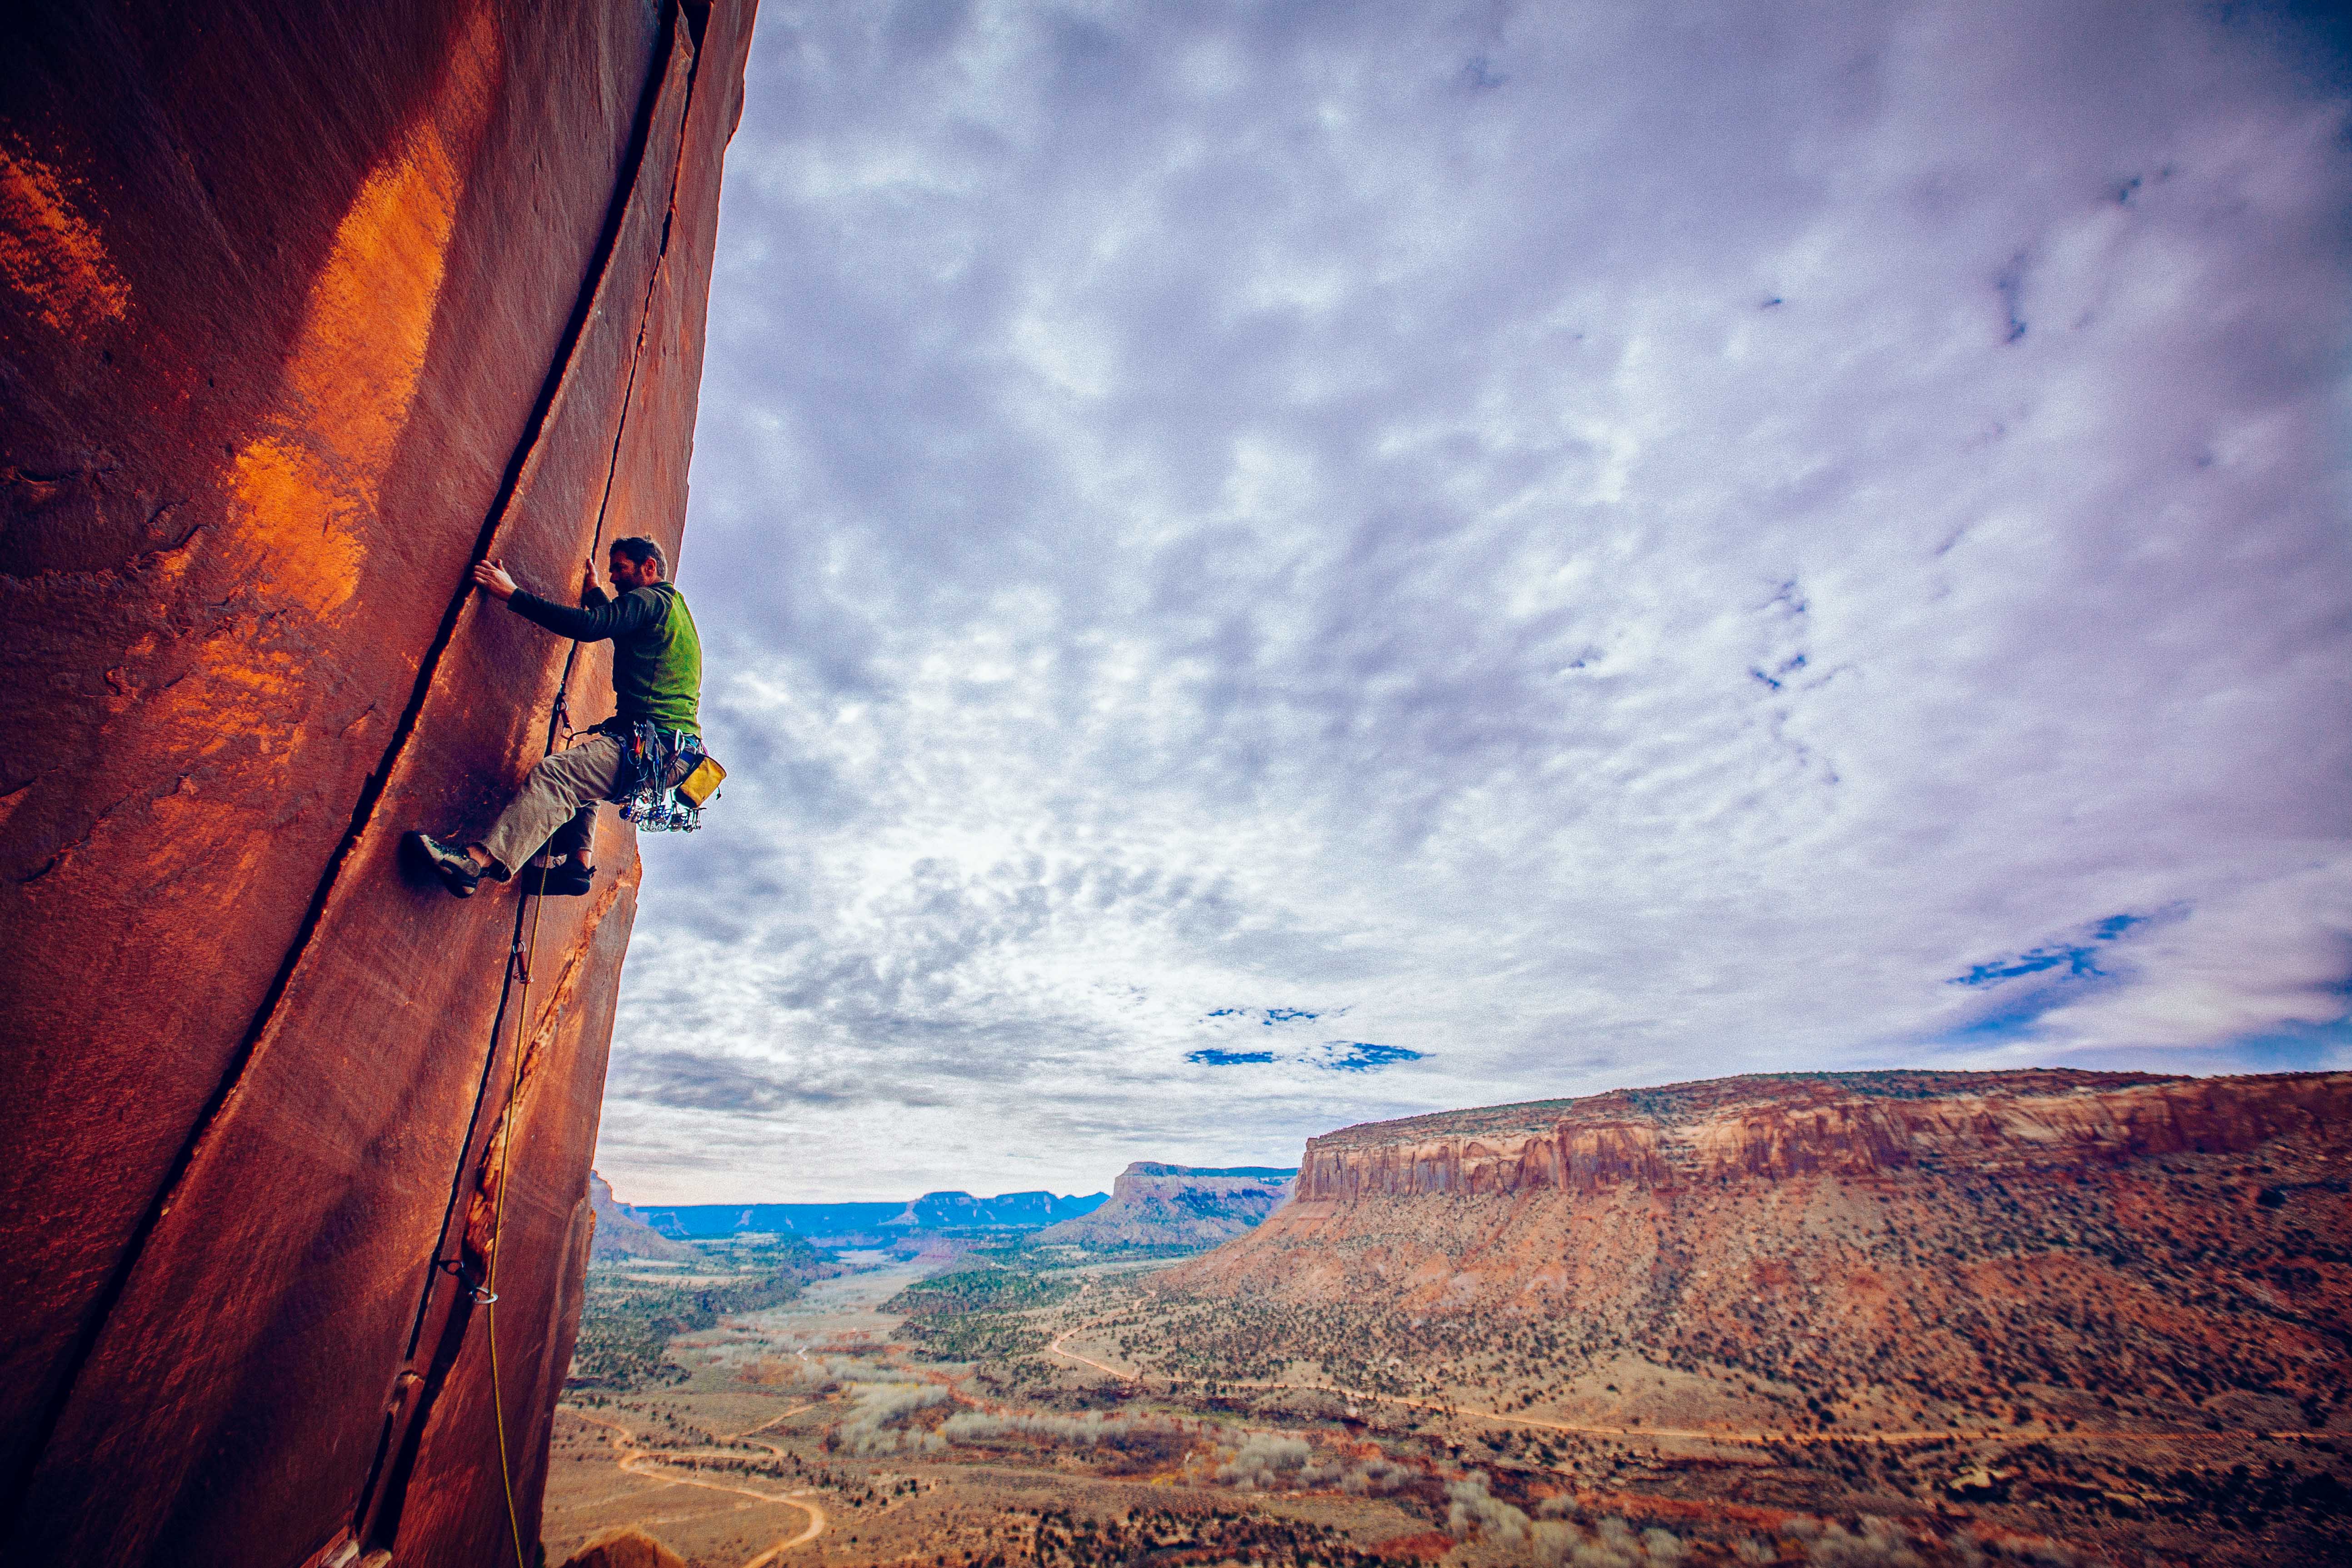 A climber scales a crack at Indian Creek. Image by  Mike Schirf / Aurora / Getty